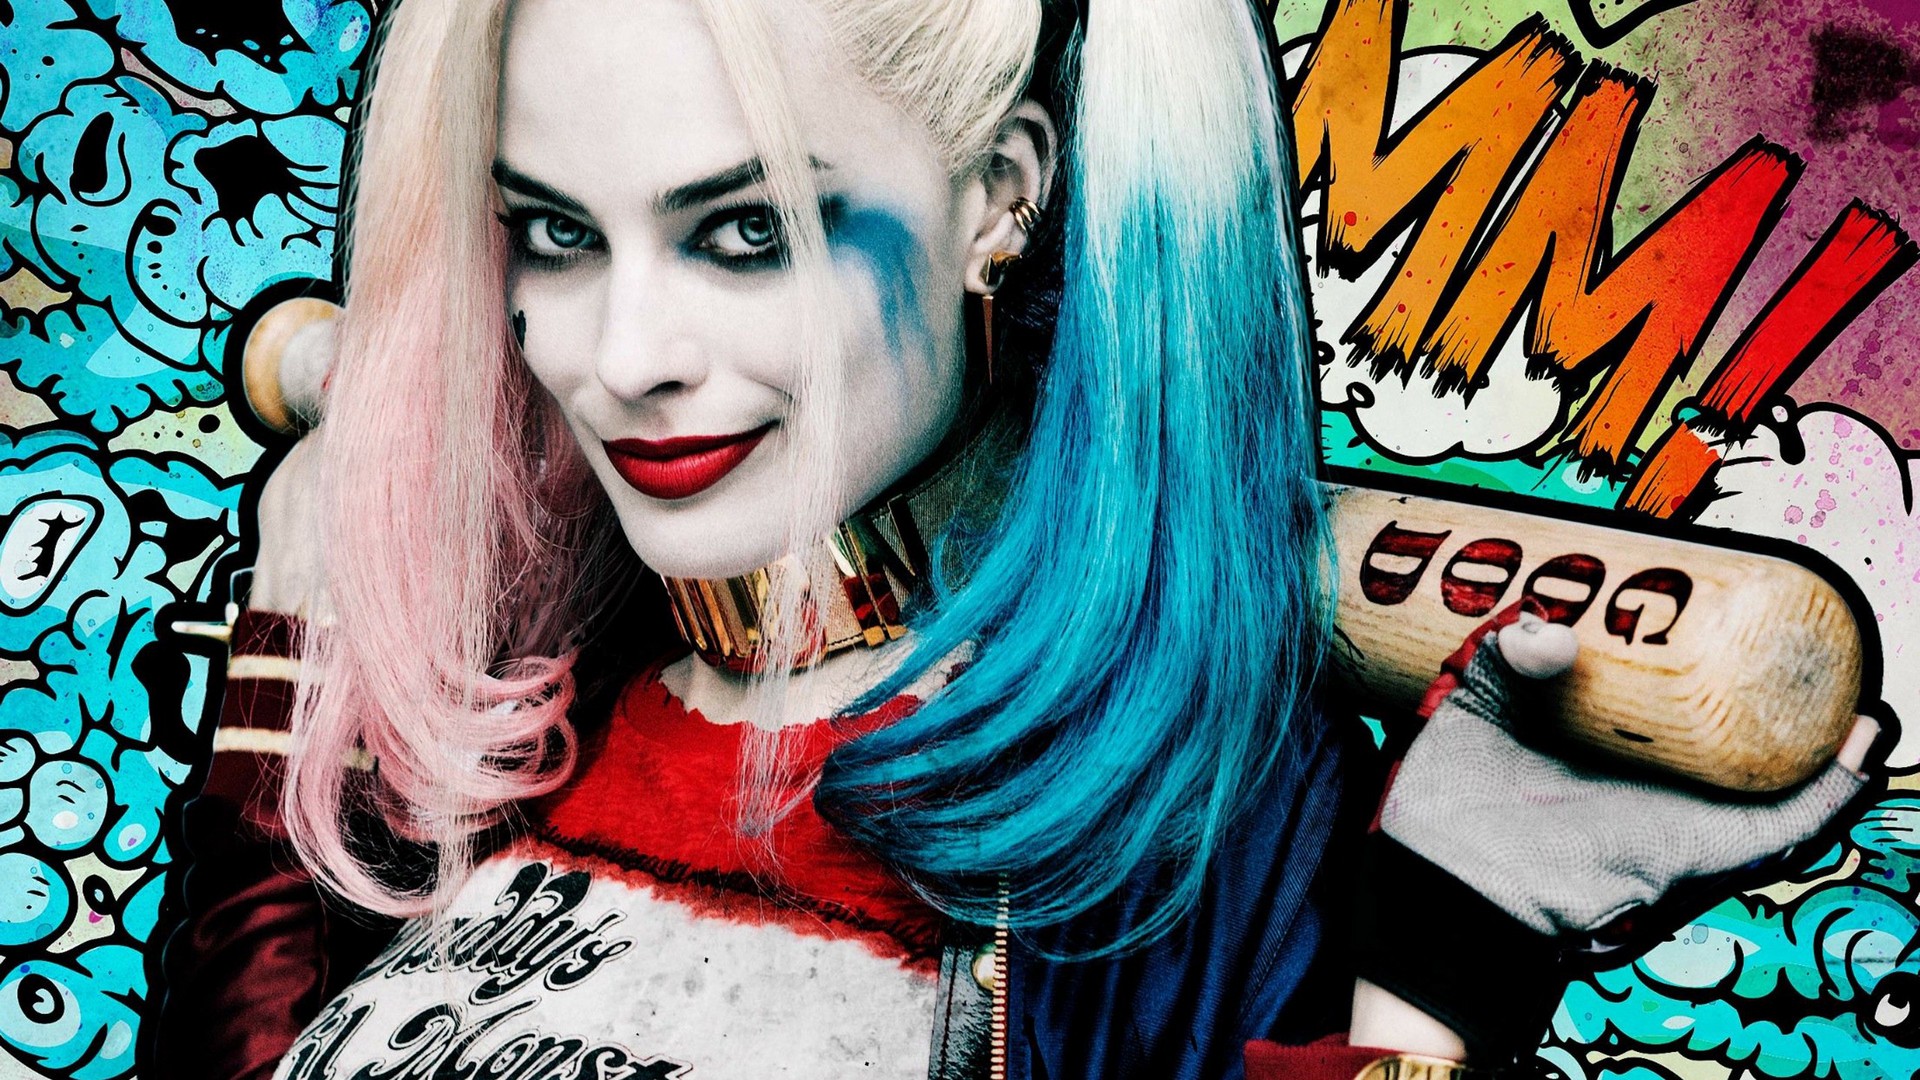 Harley Quinn Pictures Desktop Wallpaper with resolution 1920X1080 pixel. You can use this wallpaper as background for your desktop Computer Screensavers, Android or iPhone smartphones